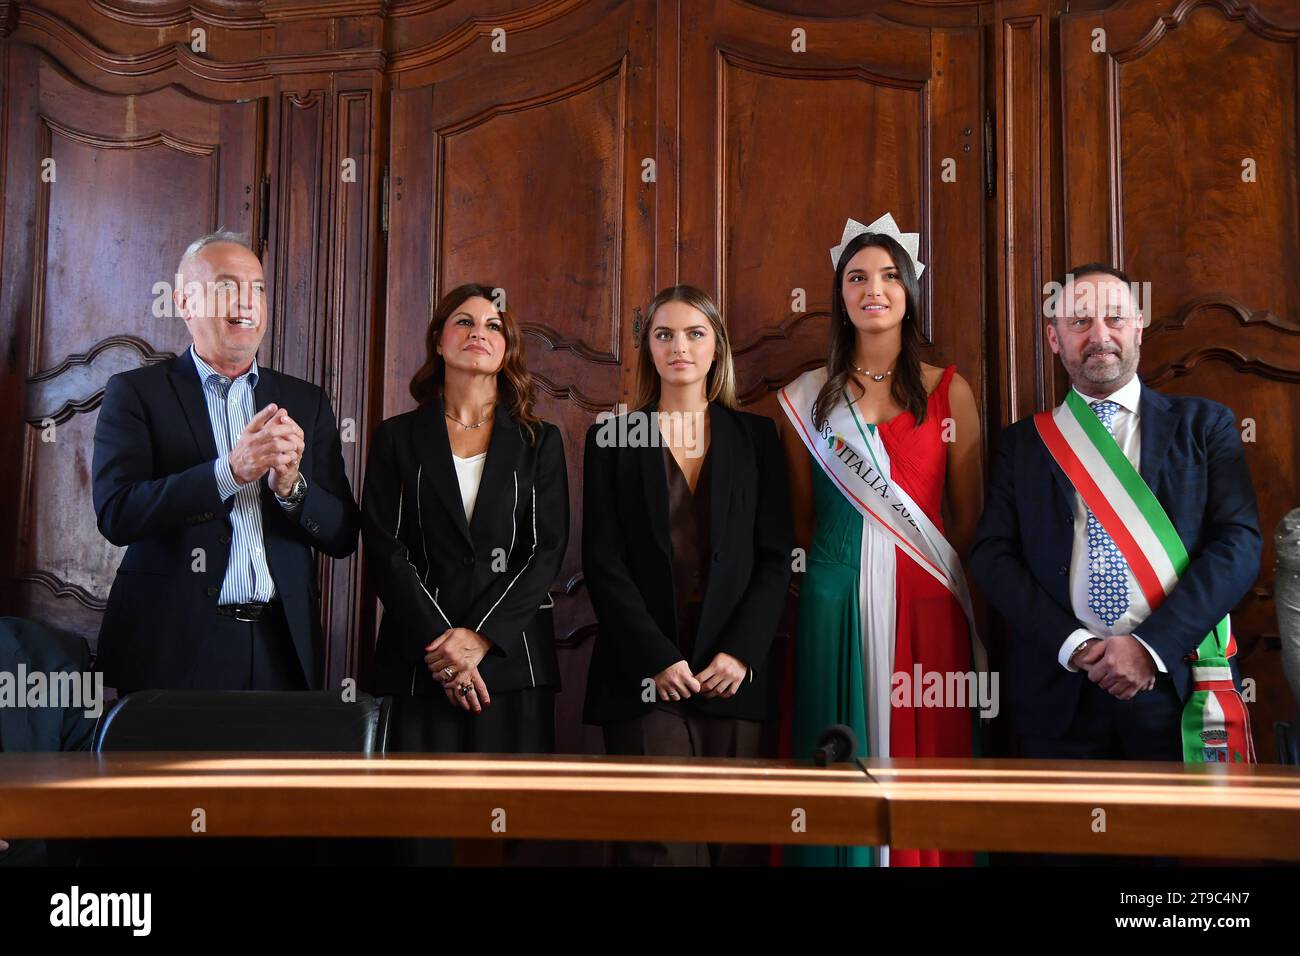 Cervere, Italy. 24th Nov, 2023. Cervere (CN): Miss Italy 2023 Francesca Bergesio on her return to Cervere. In the photo: Father Senator Giorgio Maria Bergesio, mother Ilaria, sister Virginia, Francesca Berrgesio, Miss Italy 2023, mayor Corrado Marchisio and Giorgia Meriano gold medalist at the Paralympic swimming world championships. *** Local Caption *** Cervere. Credit: Independent Photo Agency/Alamy Live News Stock Photo